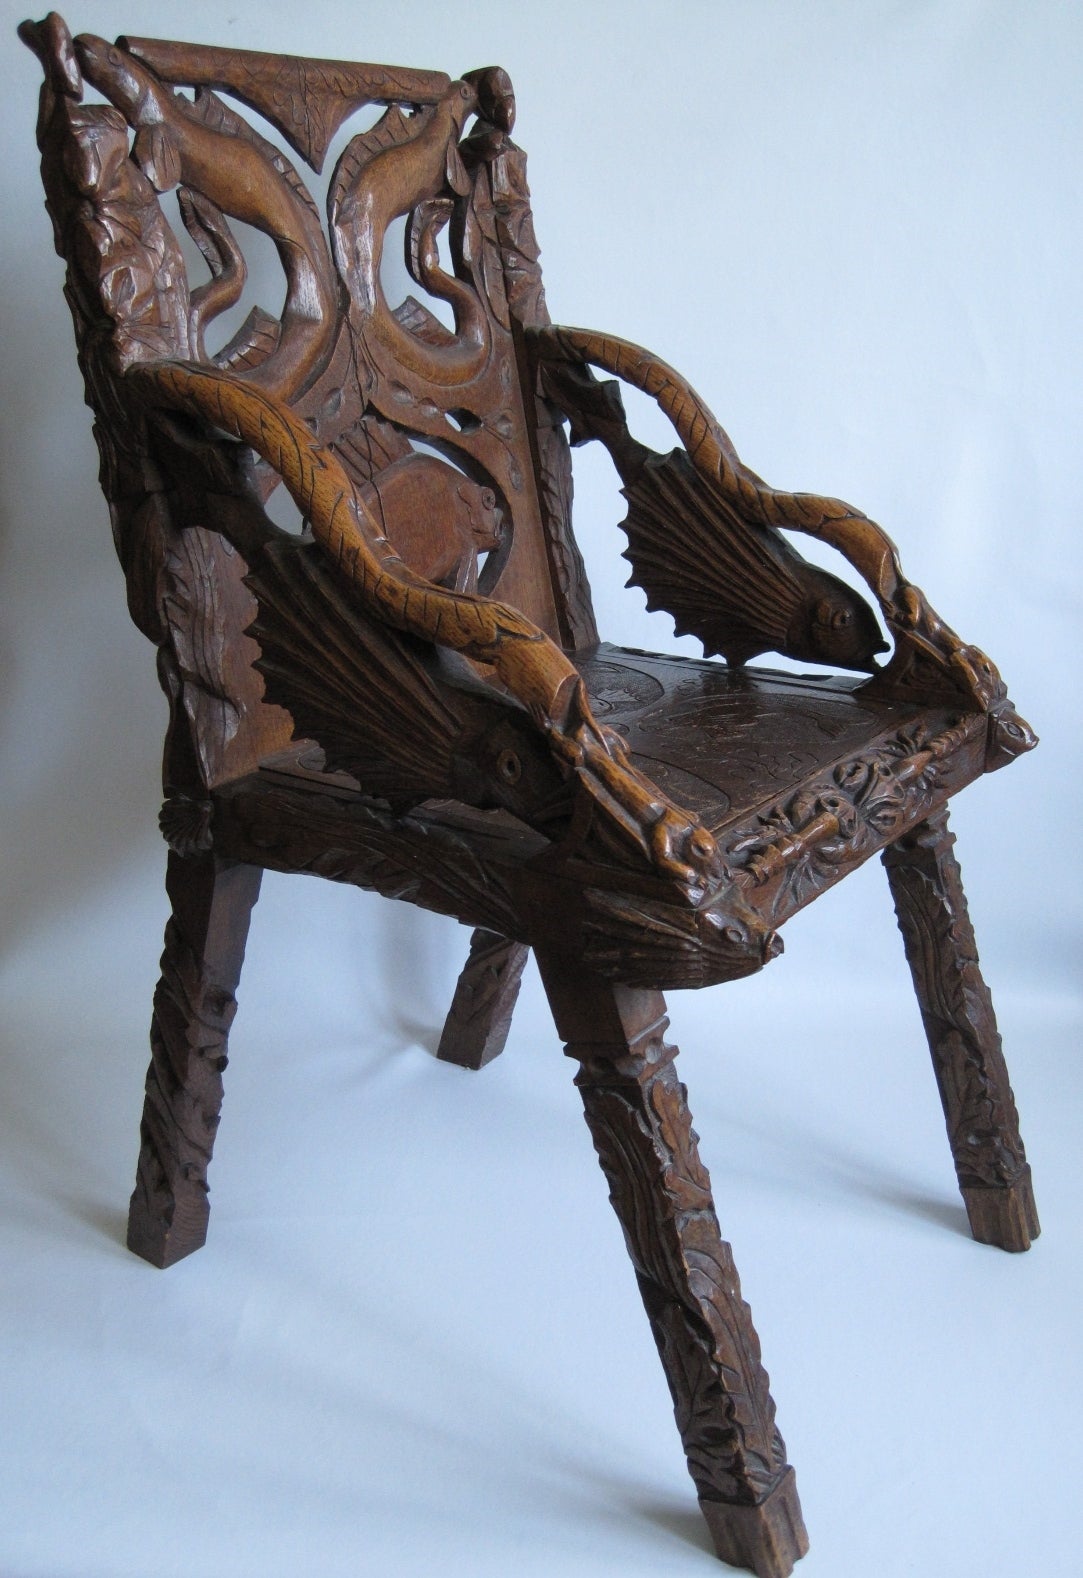 Folk Art chair signed AJW 1900. Heavily carved from top to bottom. Believed to have come from the east coast of North America.

Free shipping within the United States and Canada.